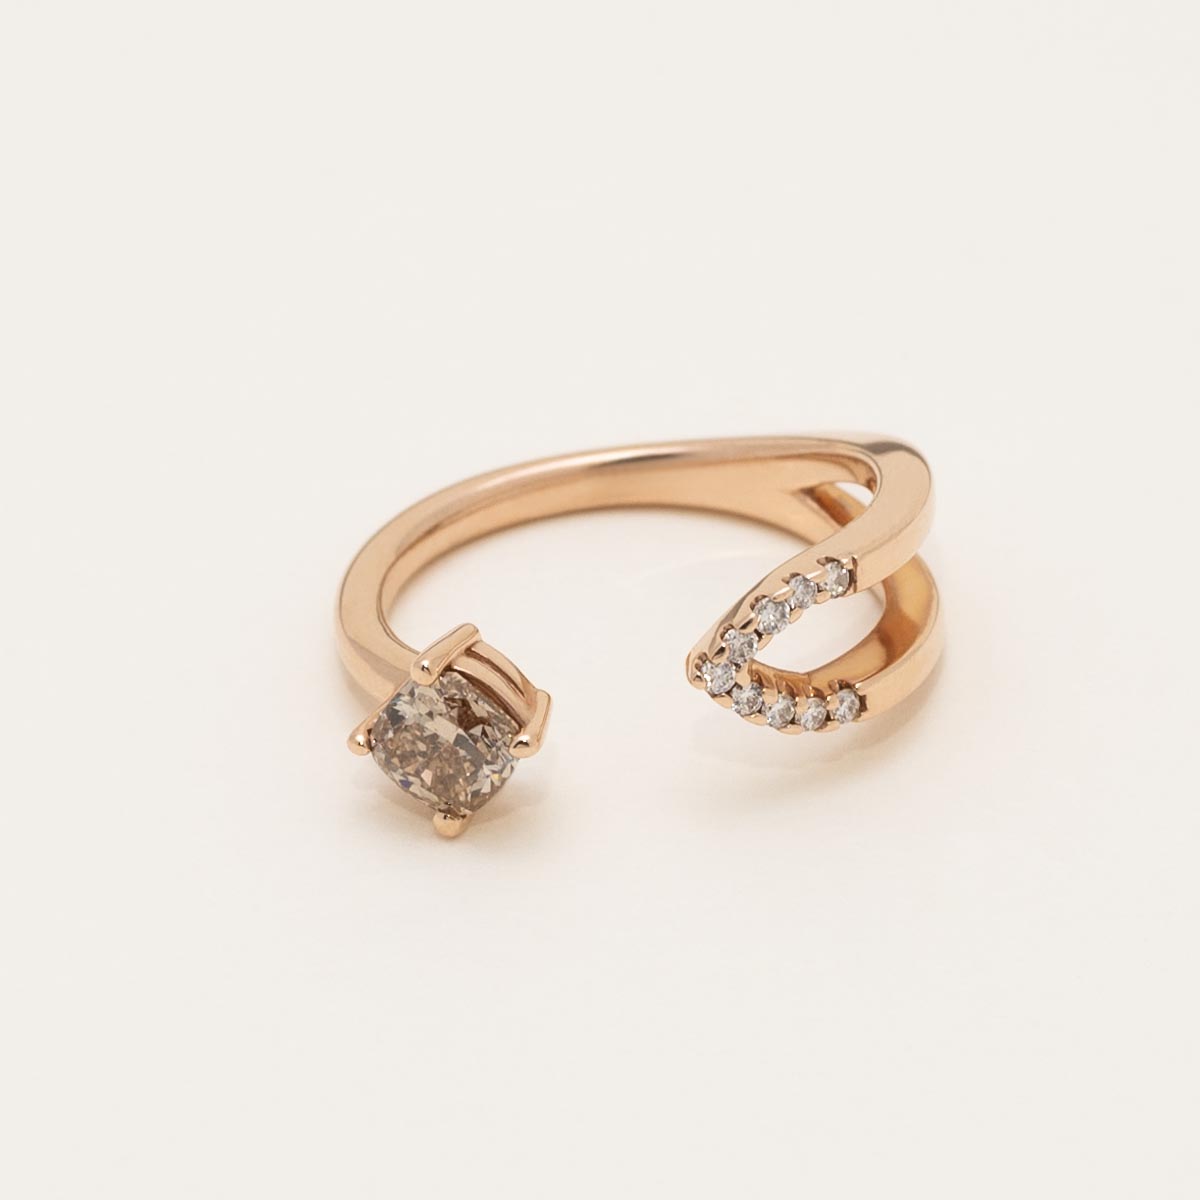 Champagne and White Diamond Ring in 14kt Rose Gold (3/4ct tw)